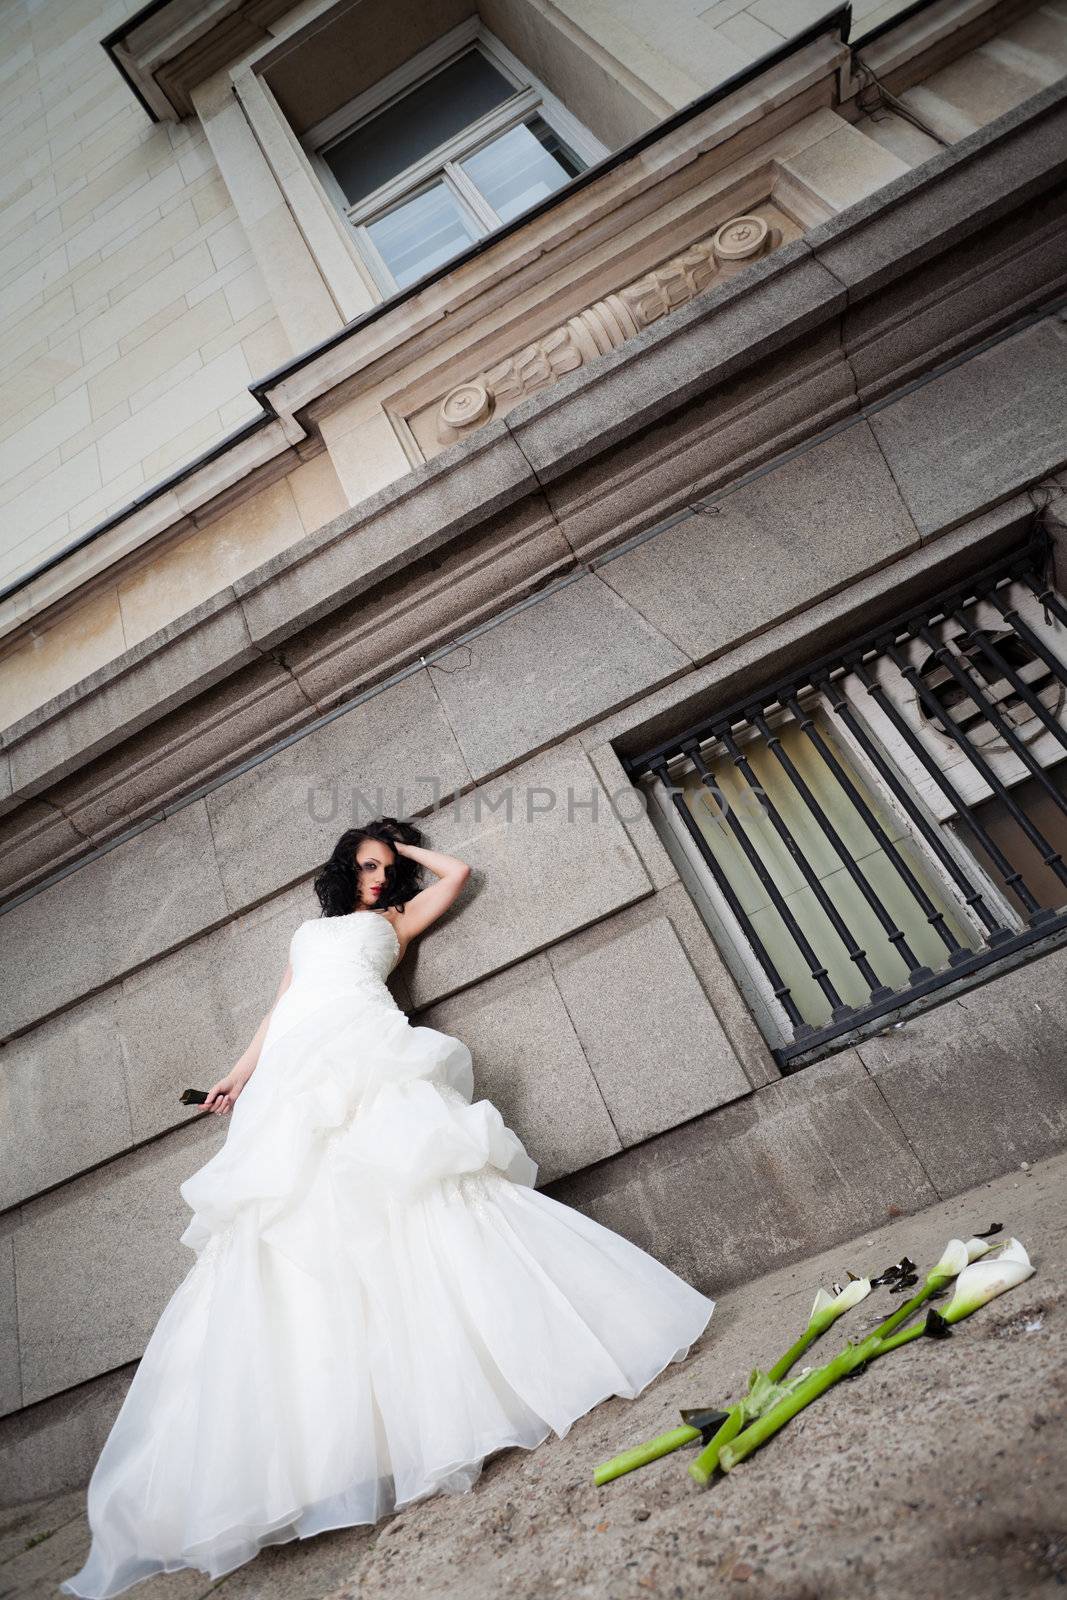 Unhappy bride with wedding dress leaning on a wall, holding broken bottle in one hand